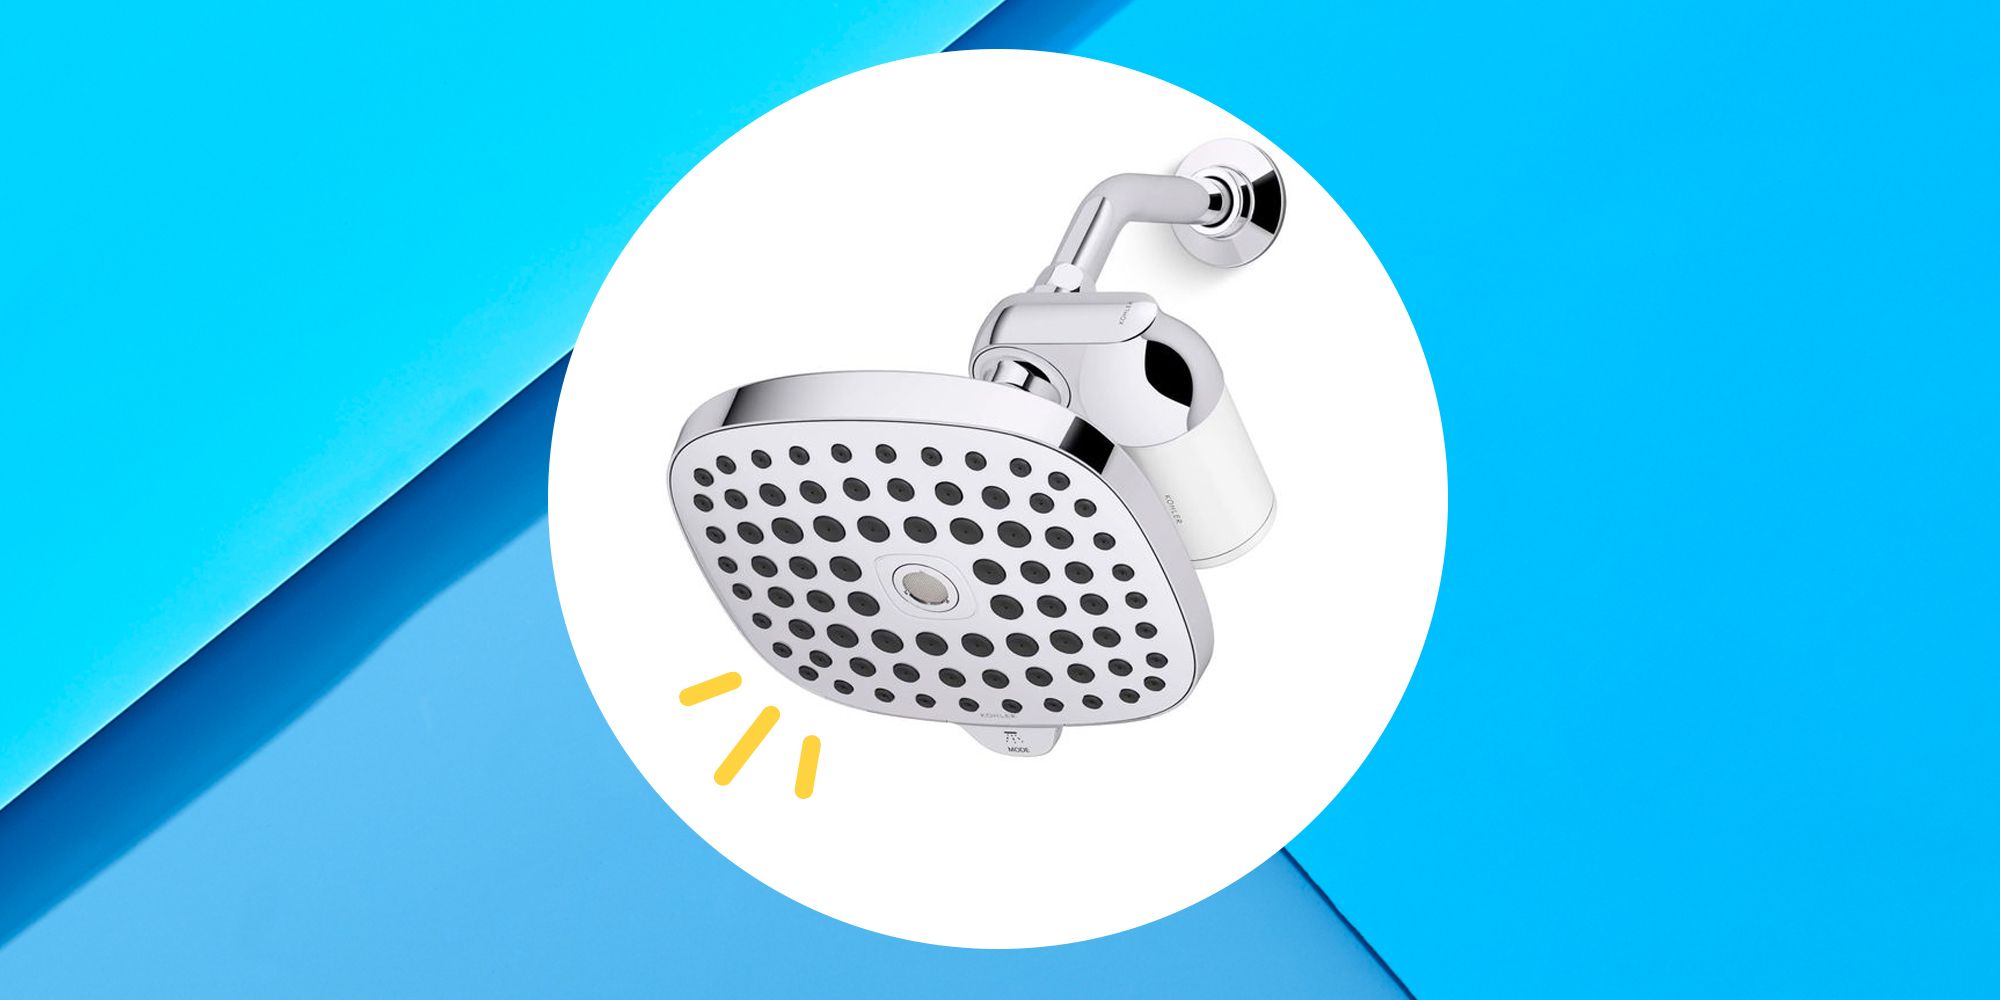 FEELSO Filtered Shower Head with Handheld, High Pressure 3 Spray Mode  Showerhead with 60 Hose, Bracket and 15 Stage Water Softener Filters for  Hard